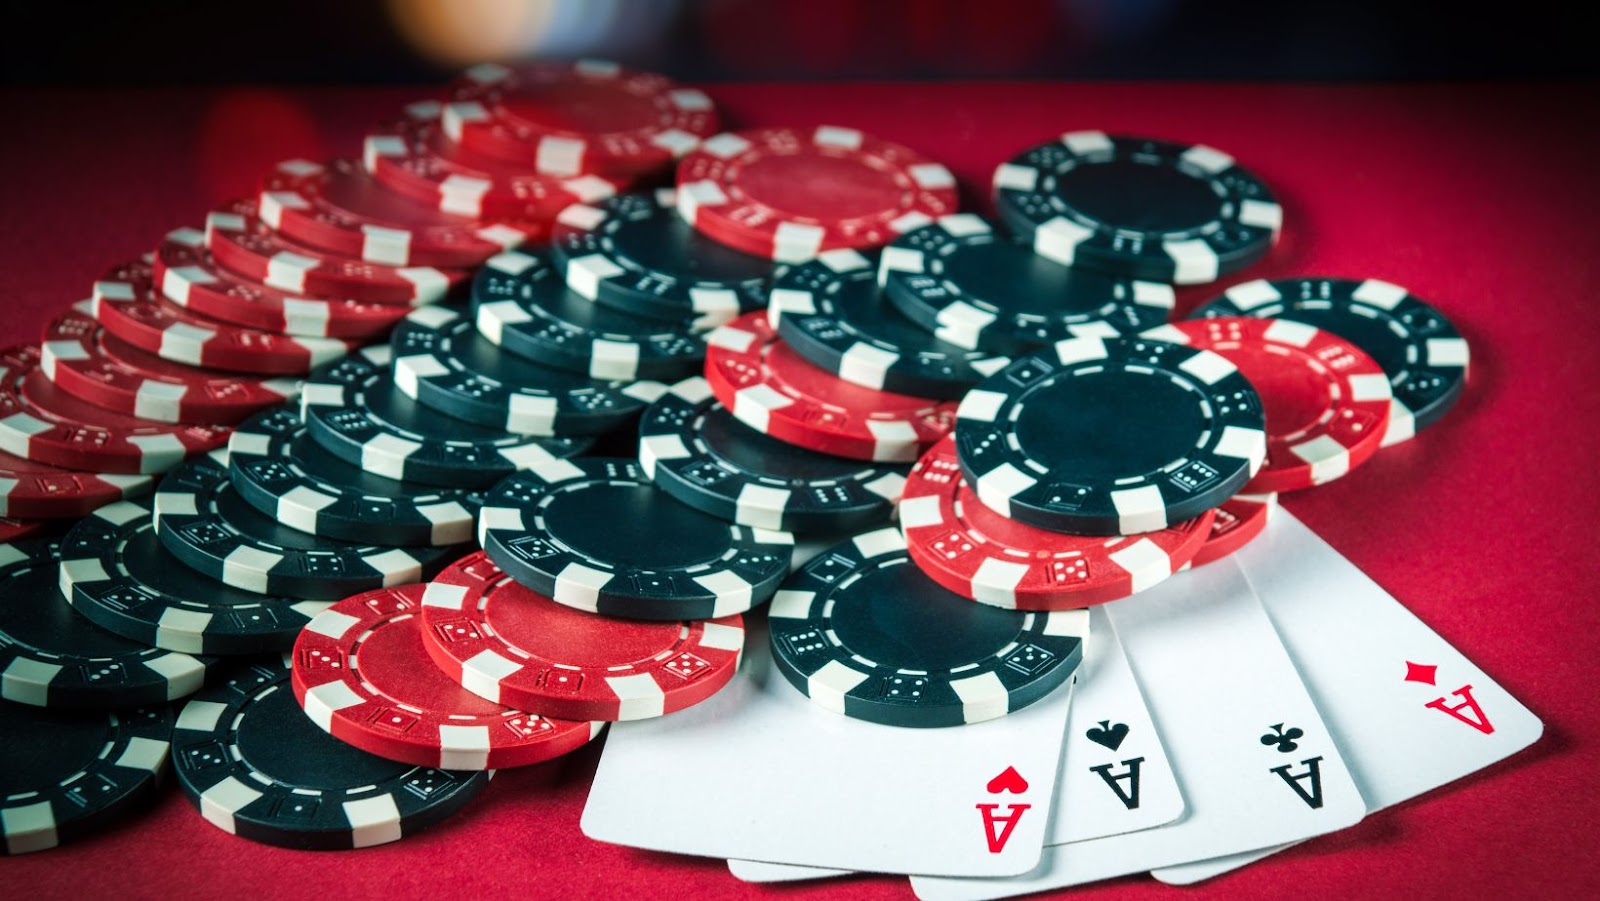 8 Tips for Improving Your Poker Game and Increasing Profits